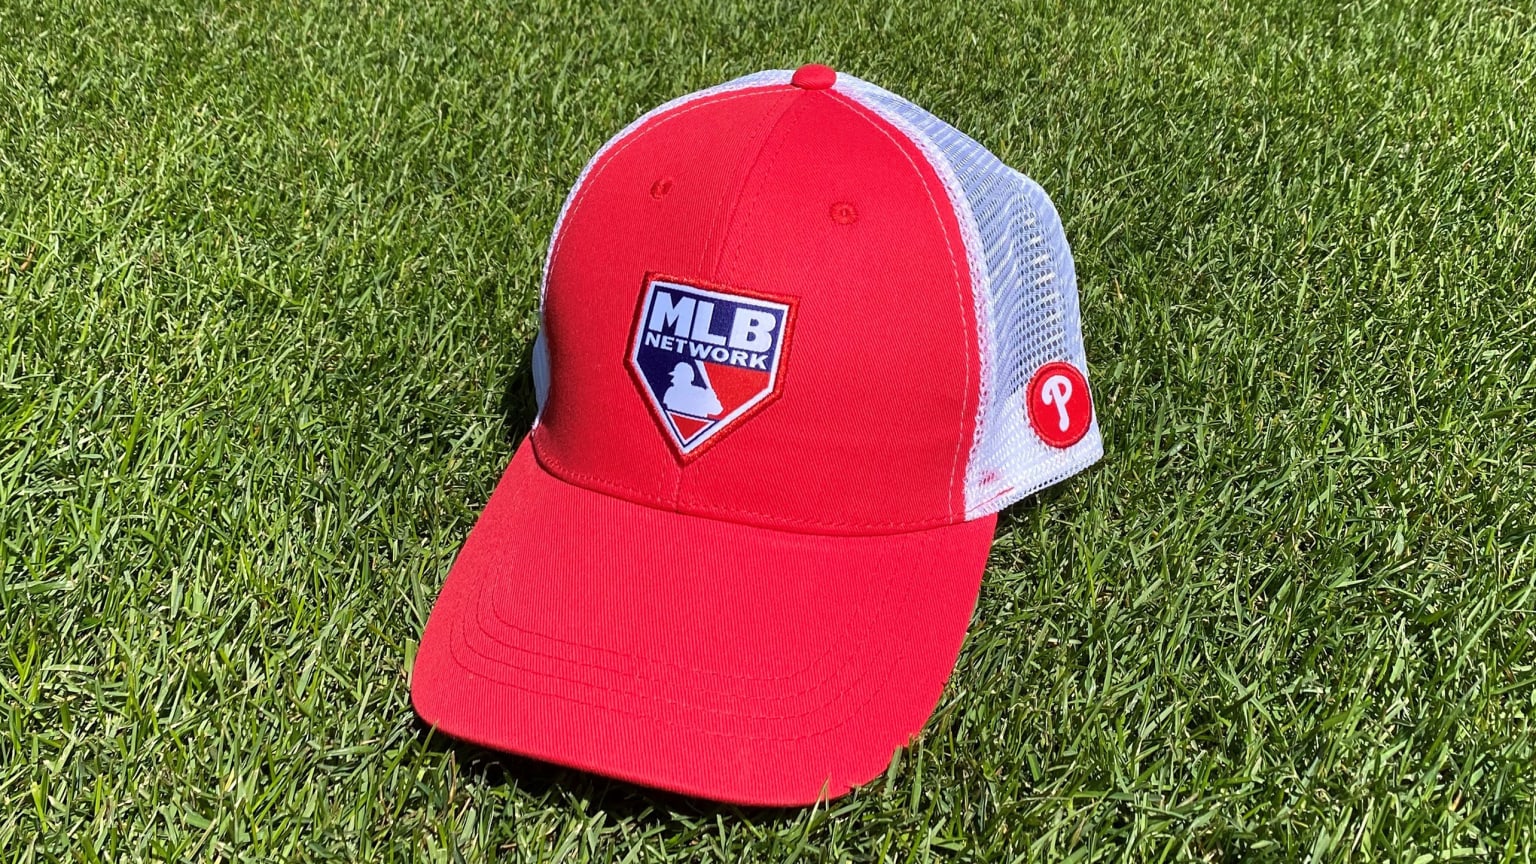 Phillies Giveaway Items